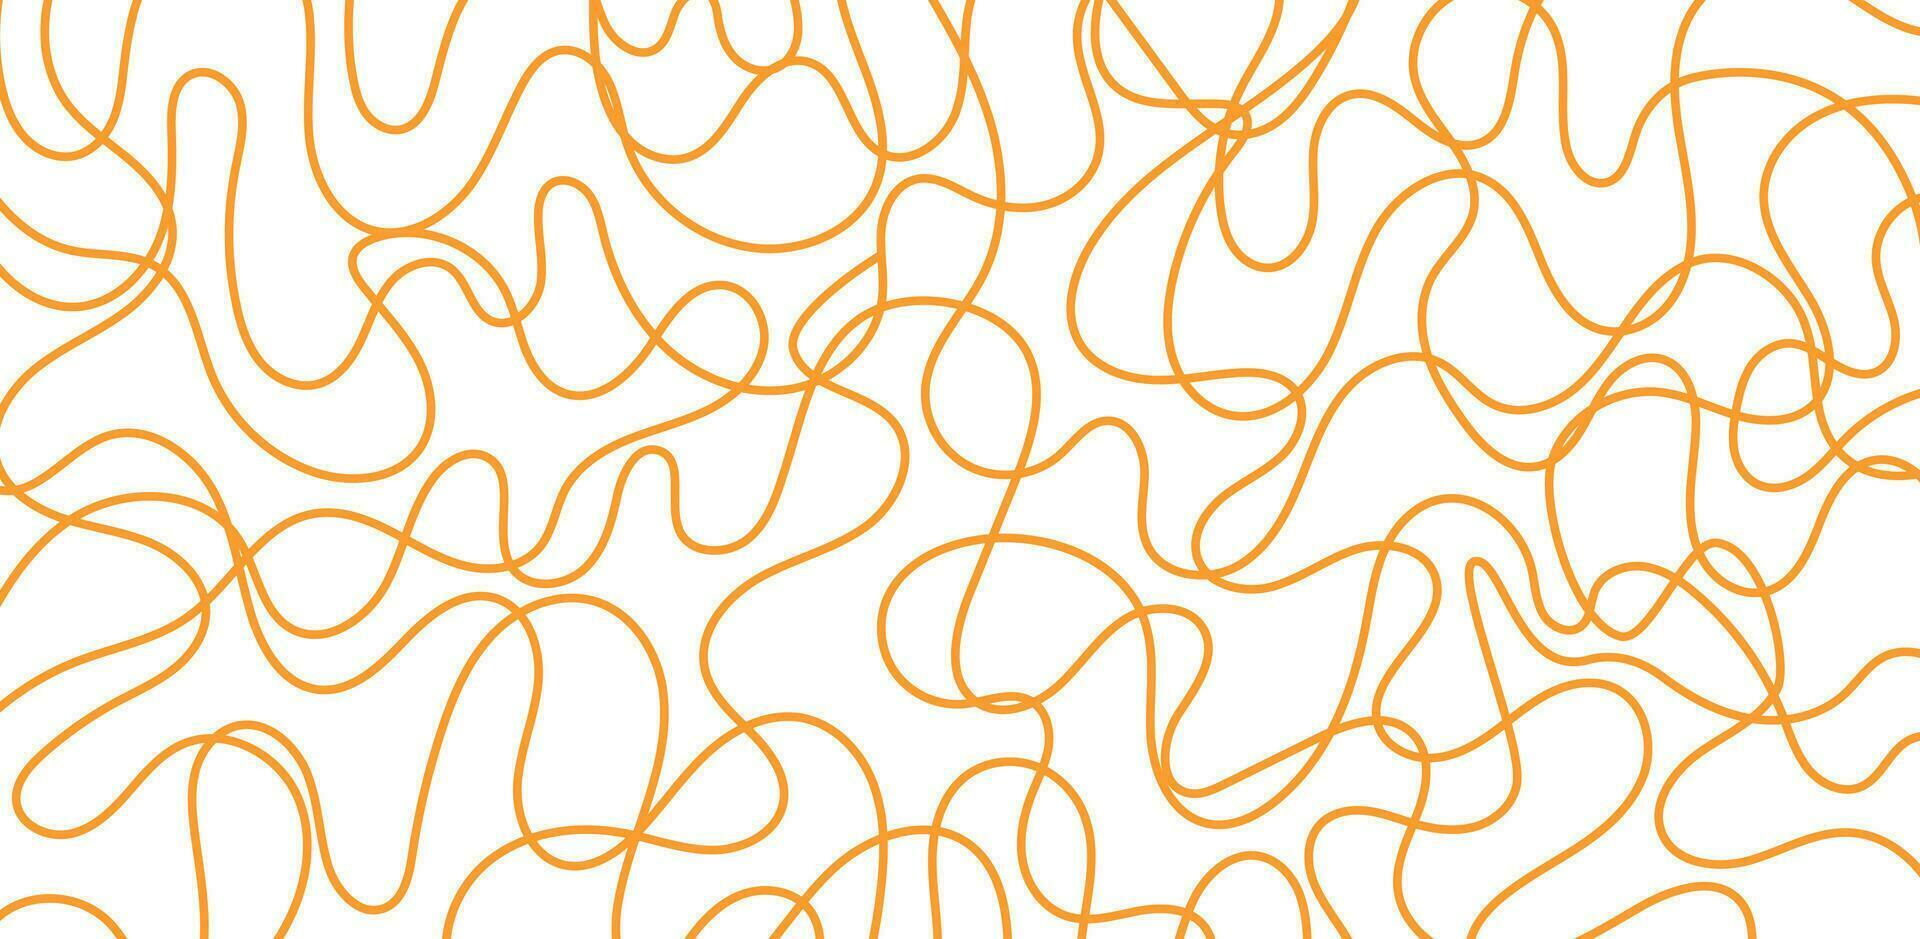 Pasta background, spaghetti abstract geometric pattern. Noodle yellow poster. vector